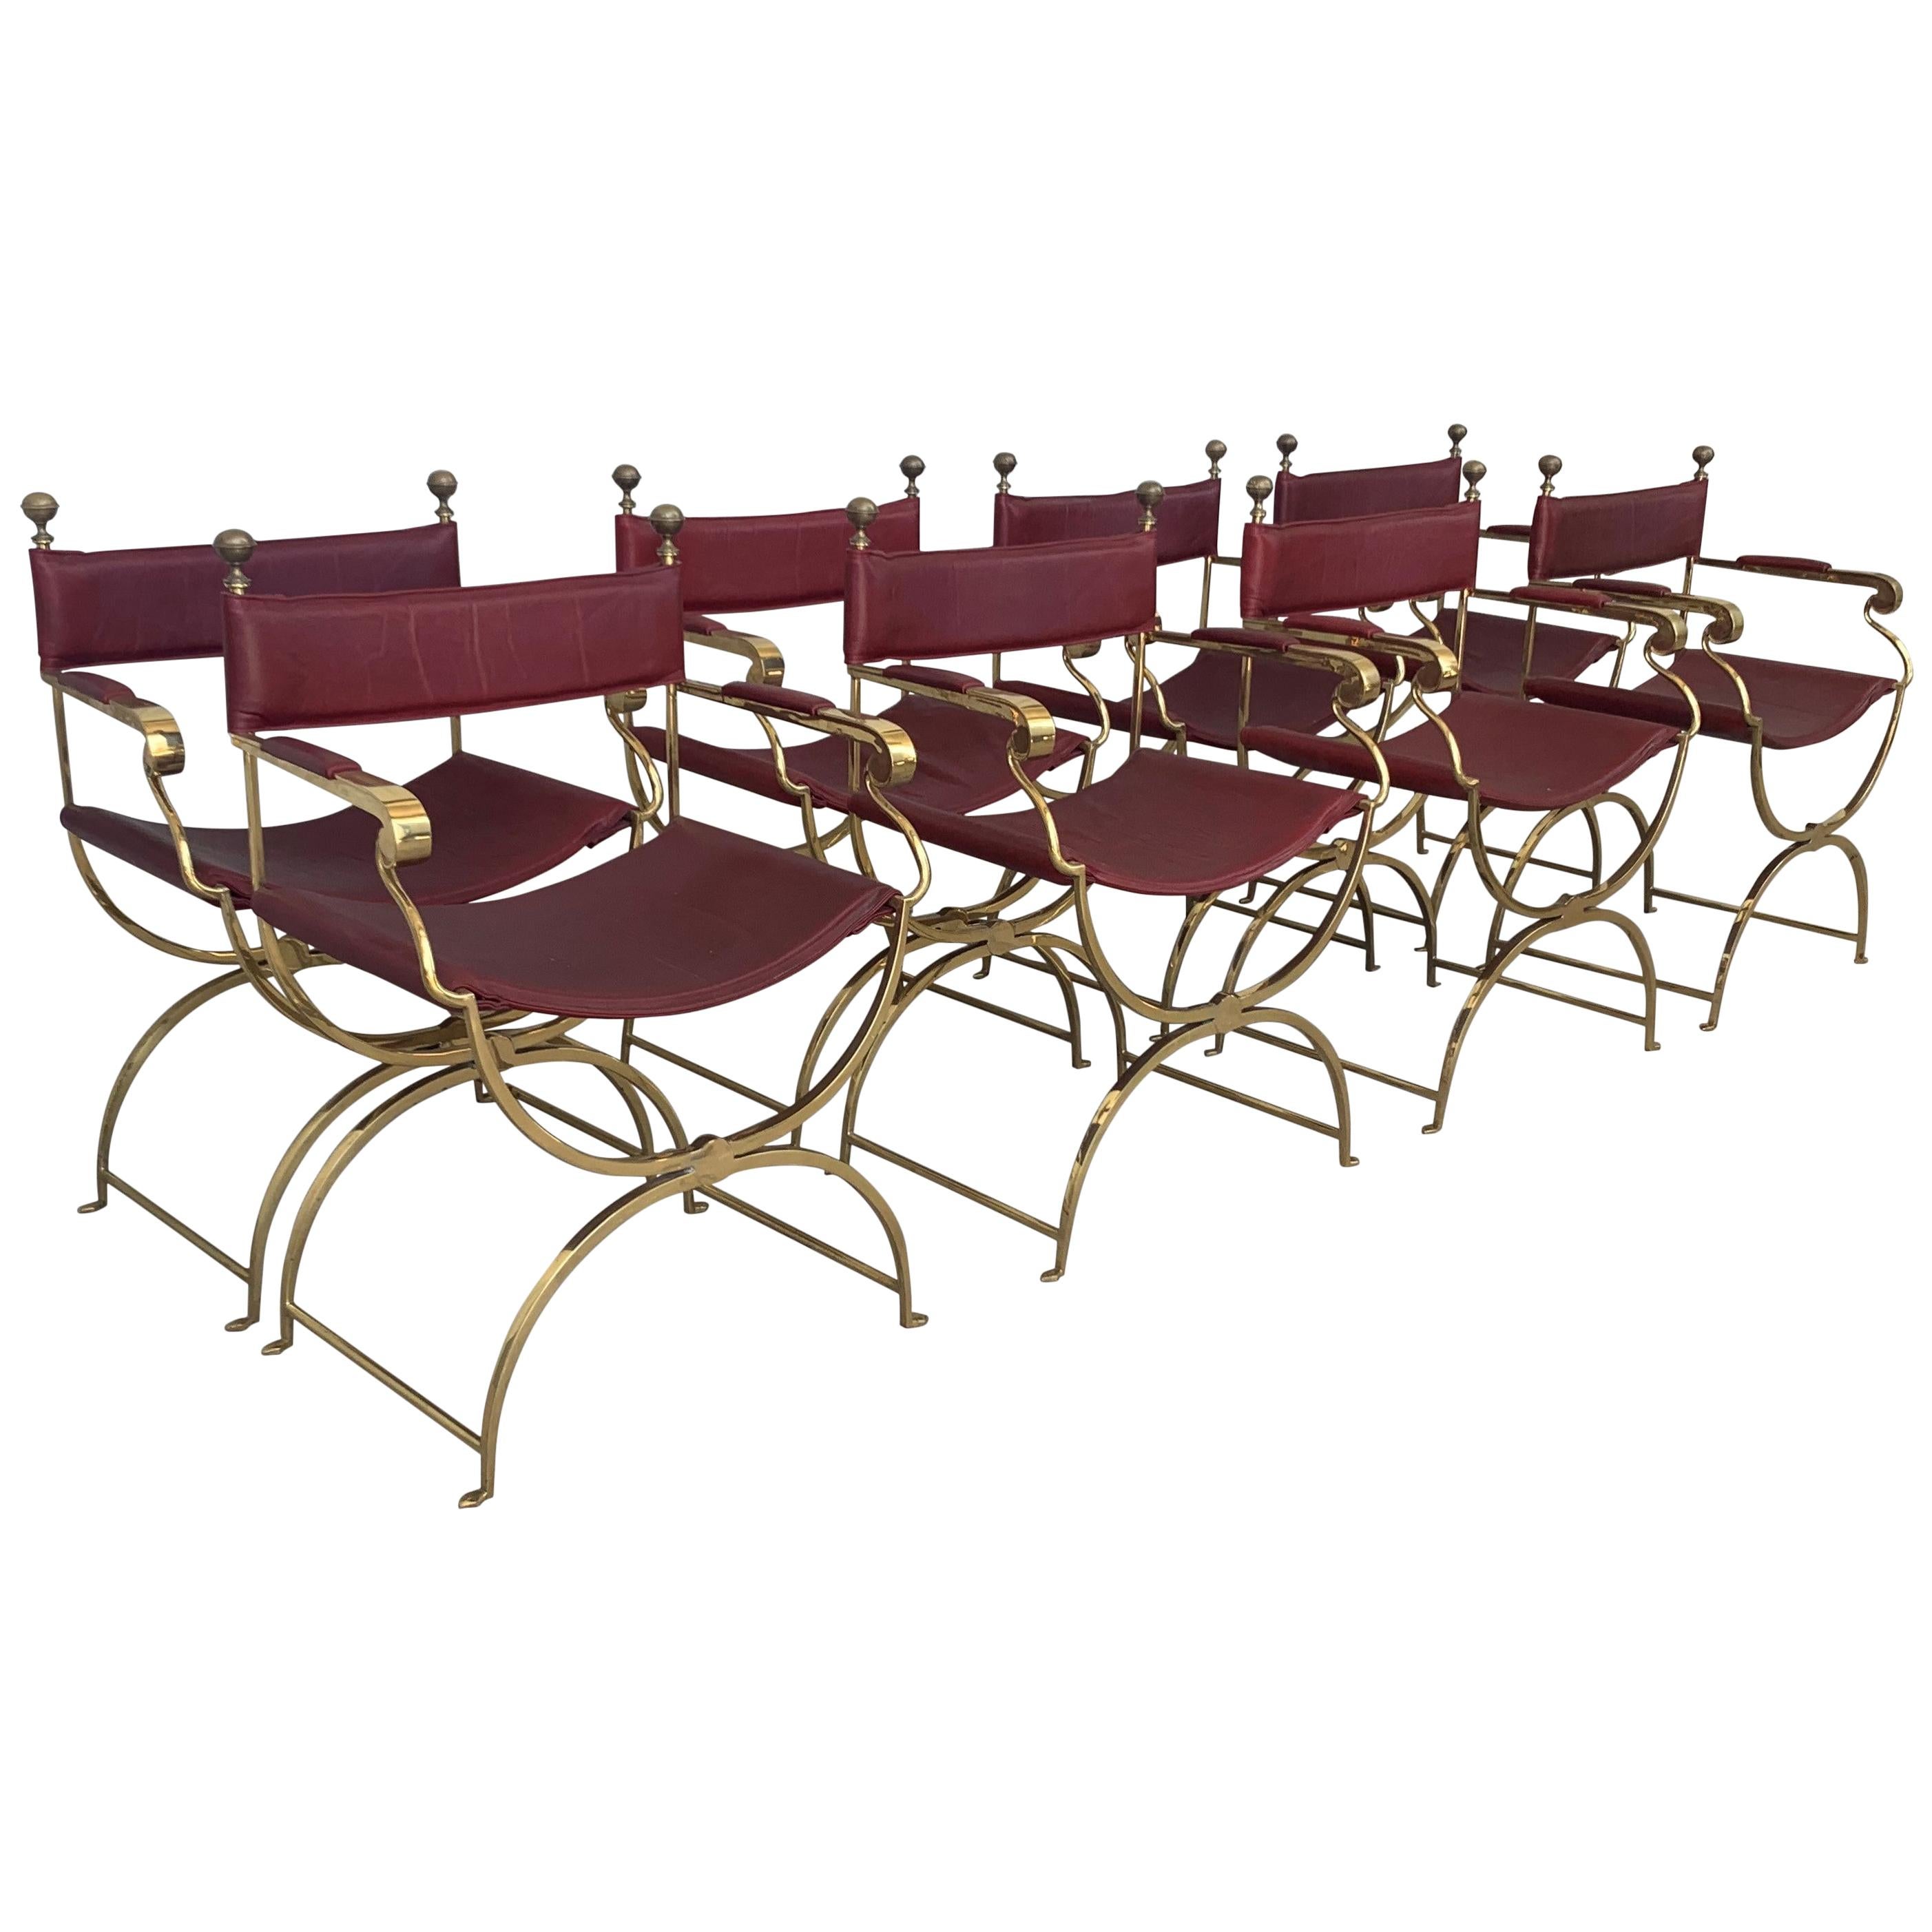 1960s Italian Hollywood Regency Chrome and Leather Savonarola Director's Chairs For Sale 1